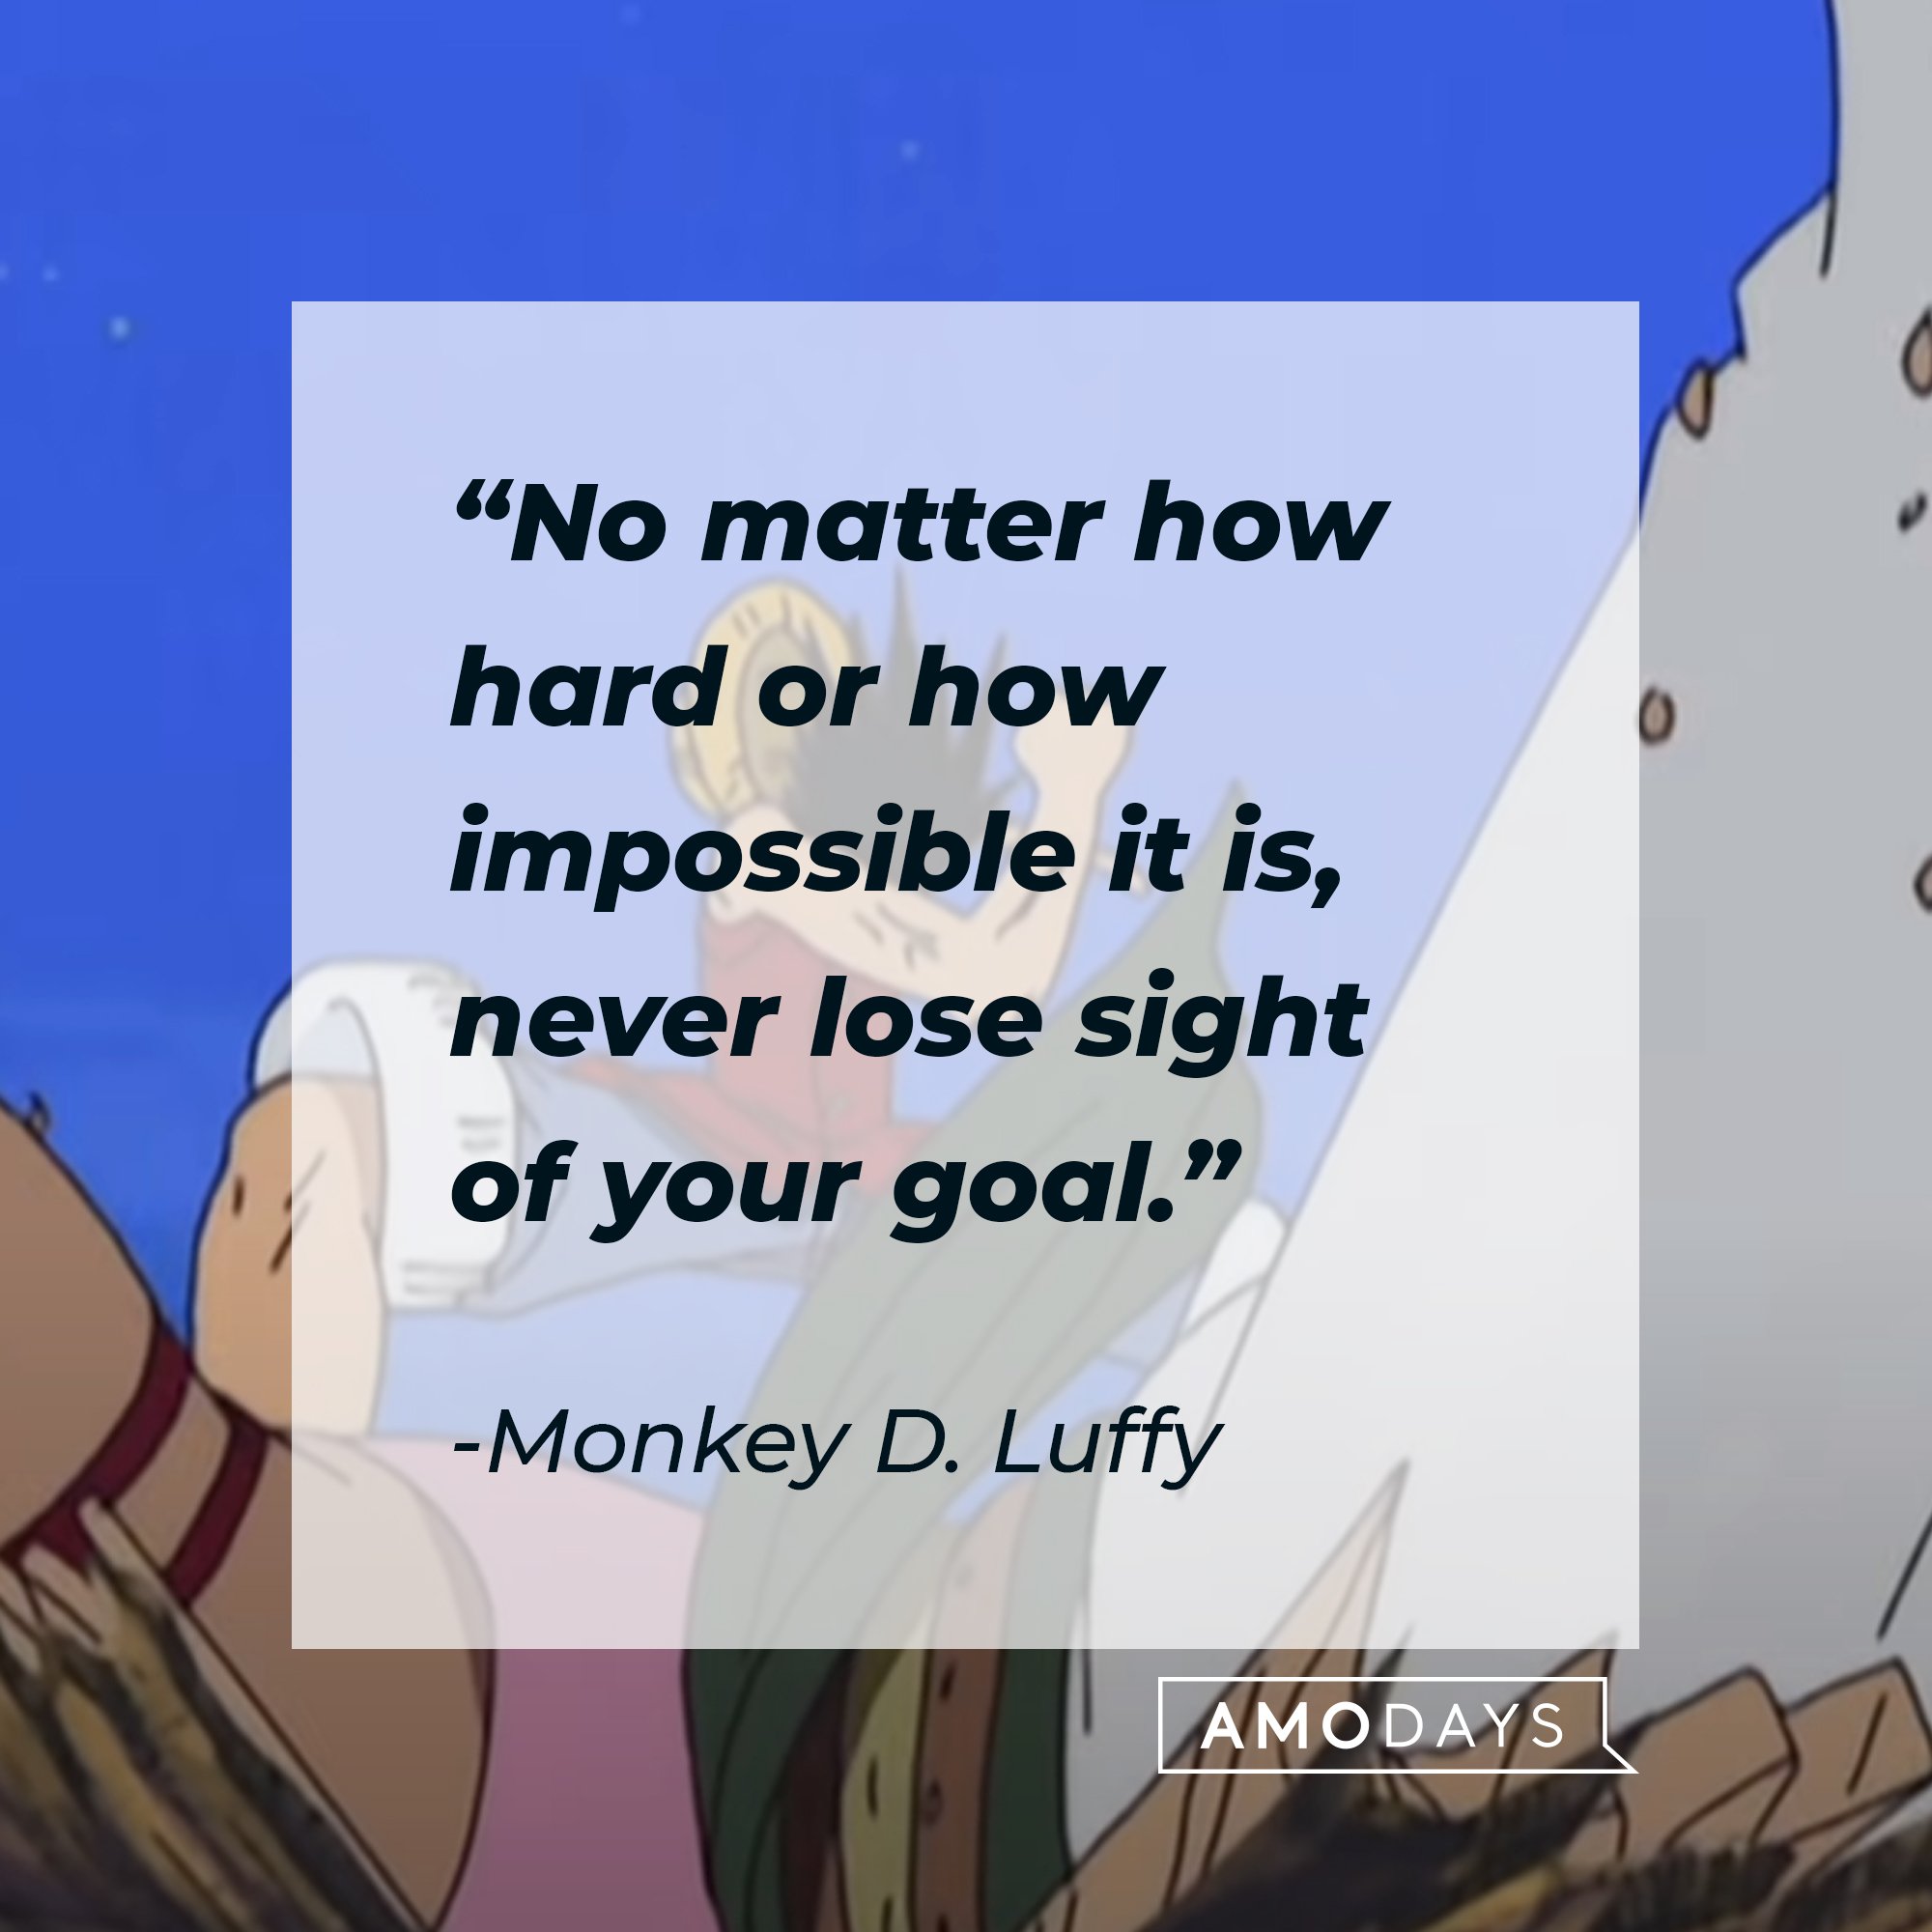 Monkey D. Luffy's quote: "No matter how hard or how impossible it is, never lose sight of your goal." |  Image: AmoDays